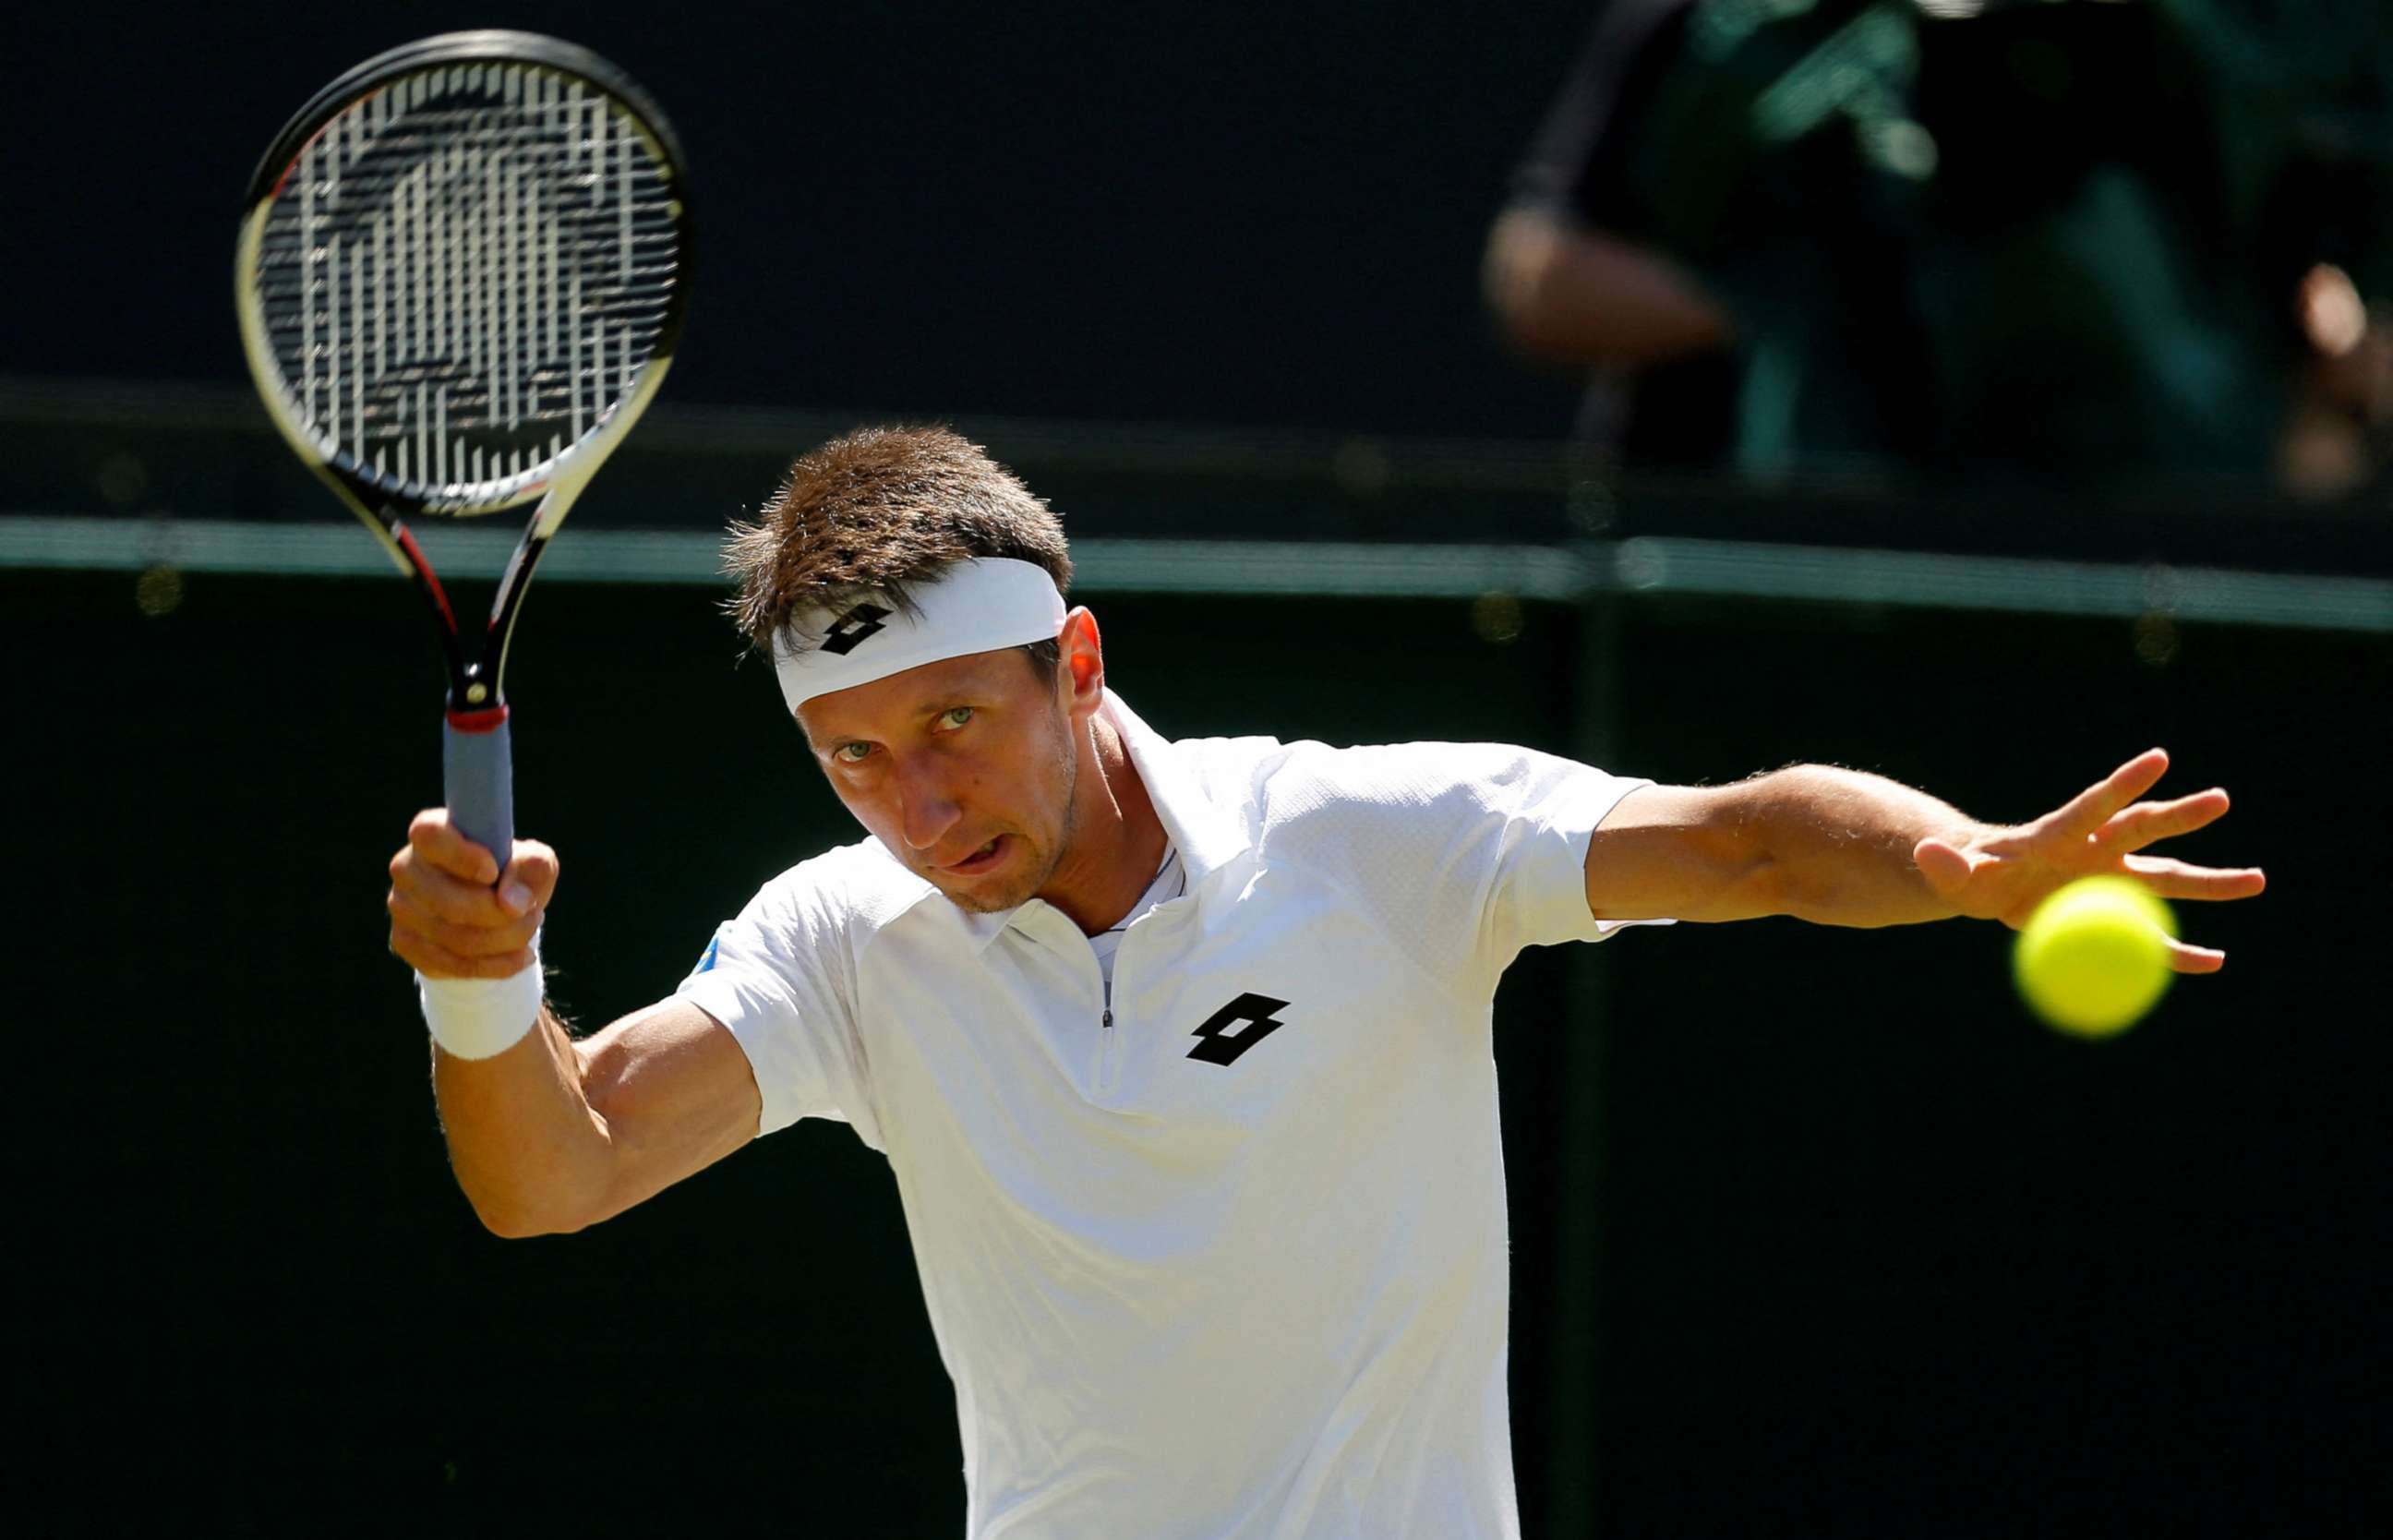 PHOTO: Ukraine's Sergiy Stakhovsky in action during his second round match at Wimbledon in London, July 5, 2017.